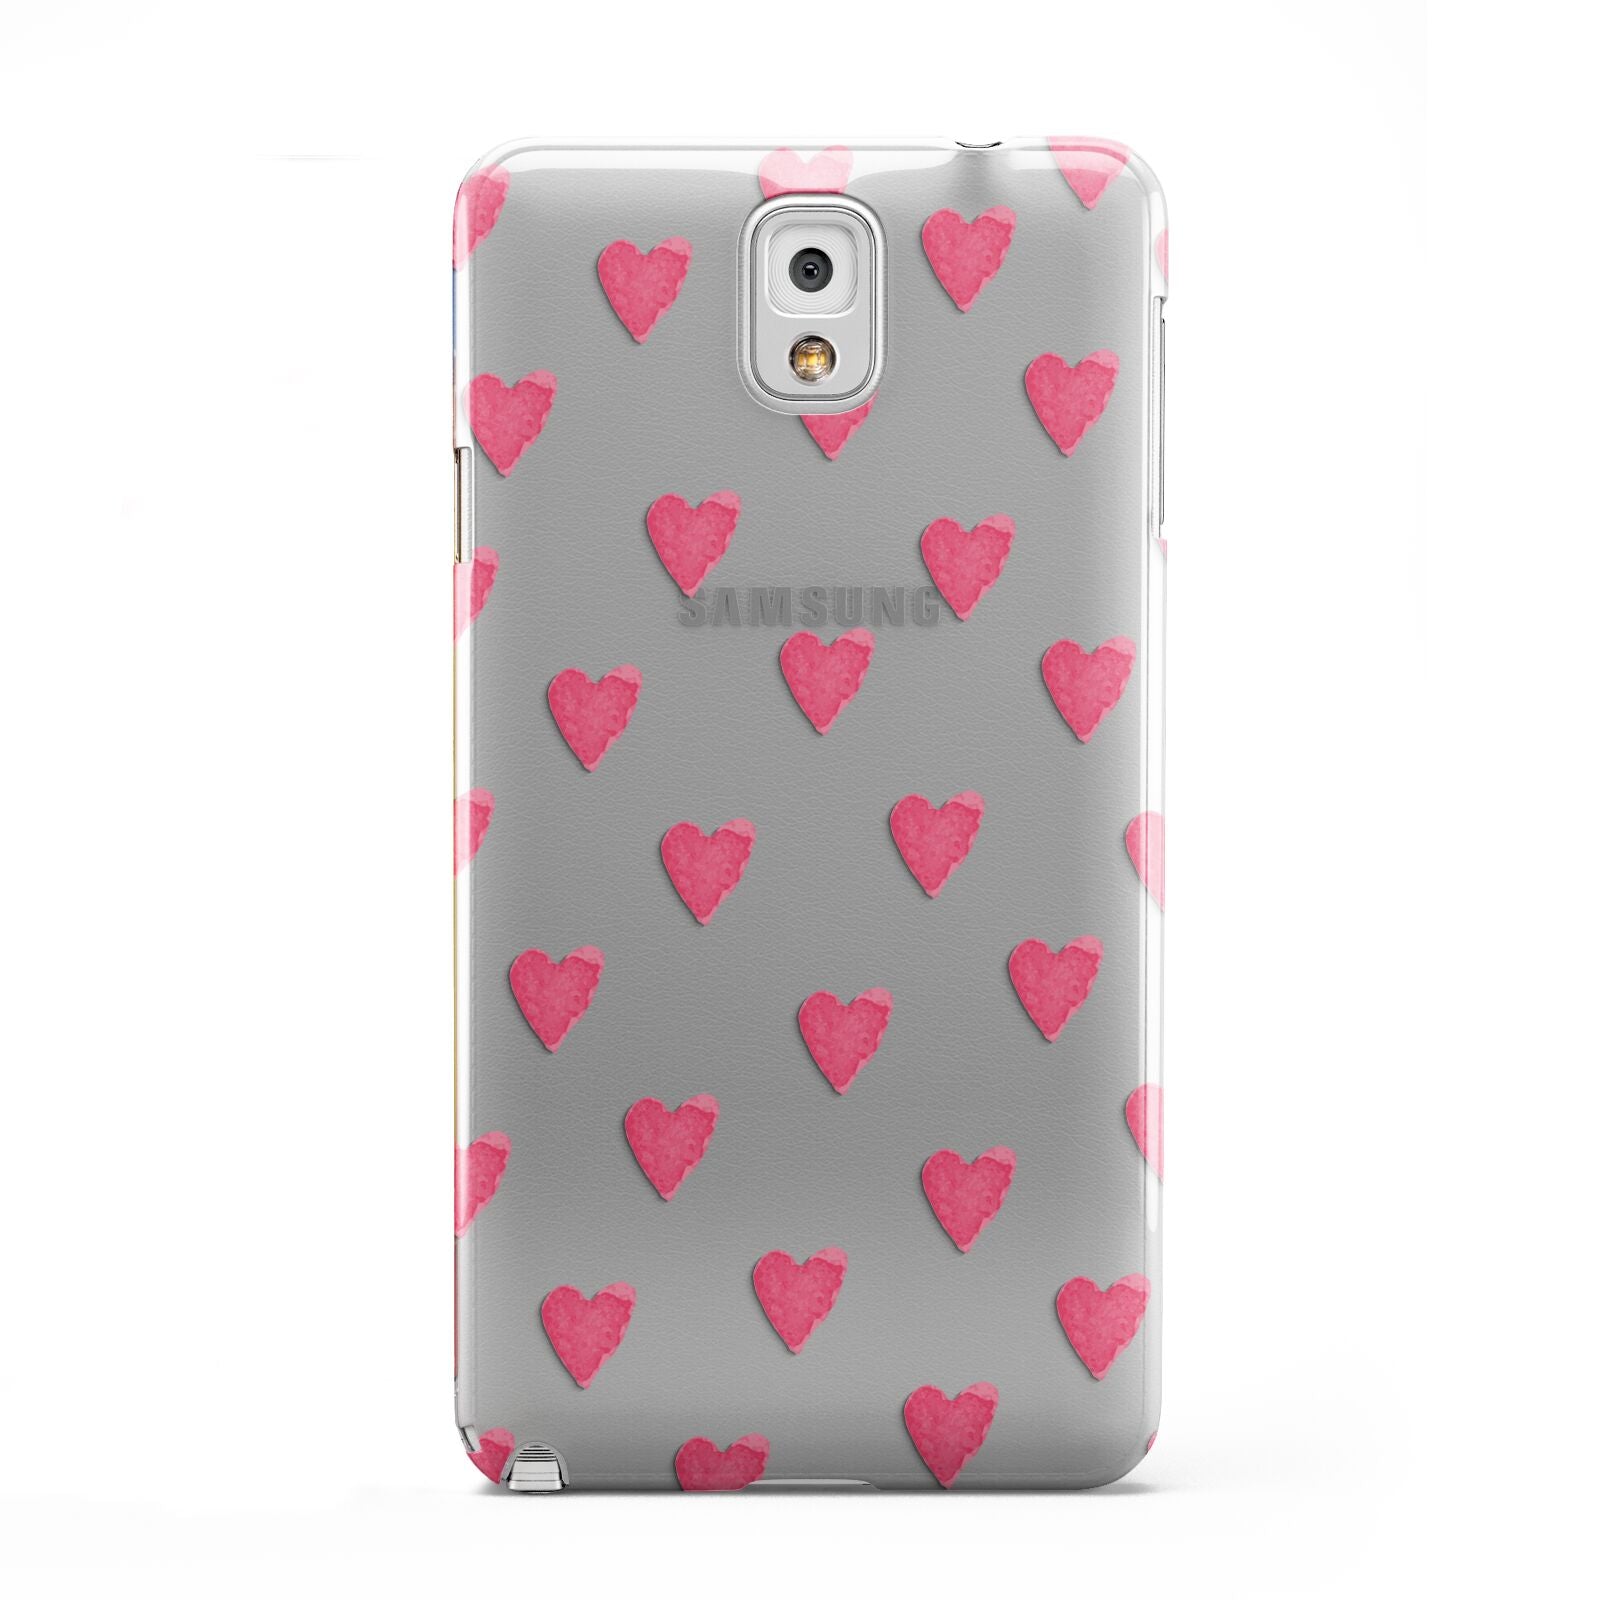 Heart Patterned Samsung Galaxy Note 3 Case